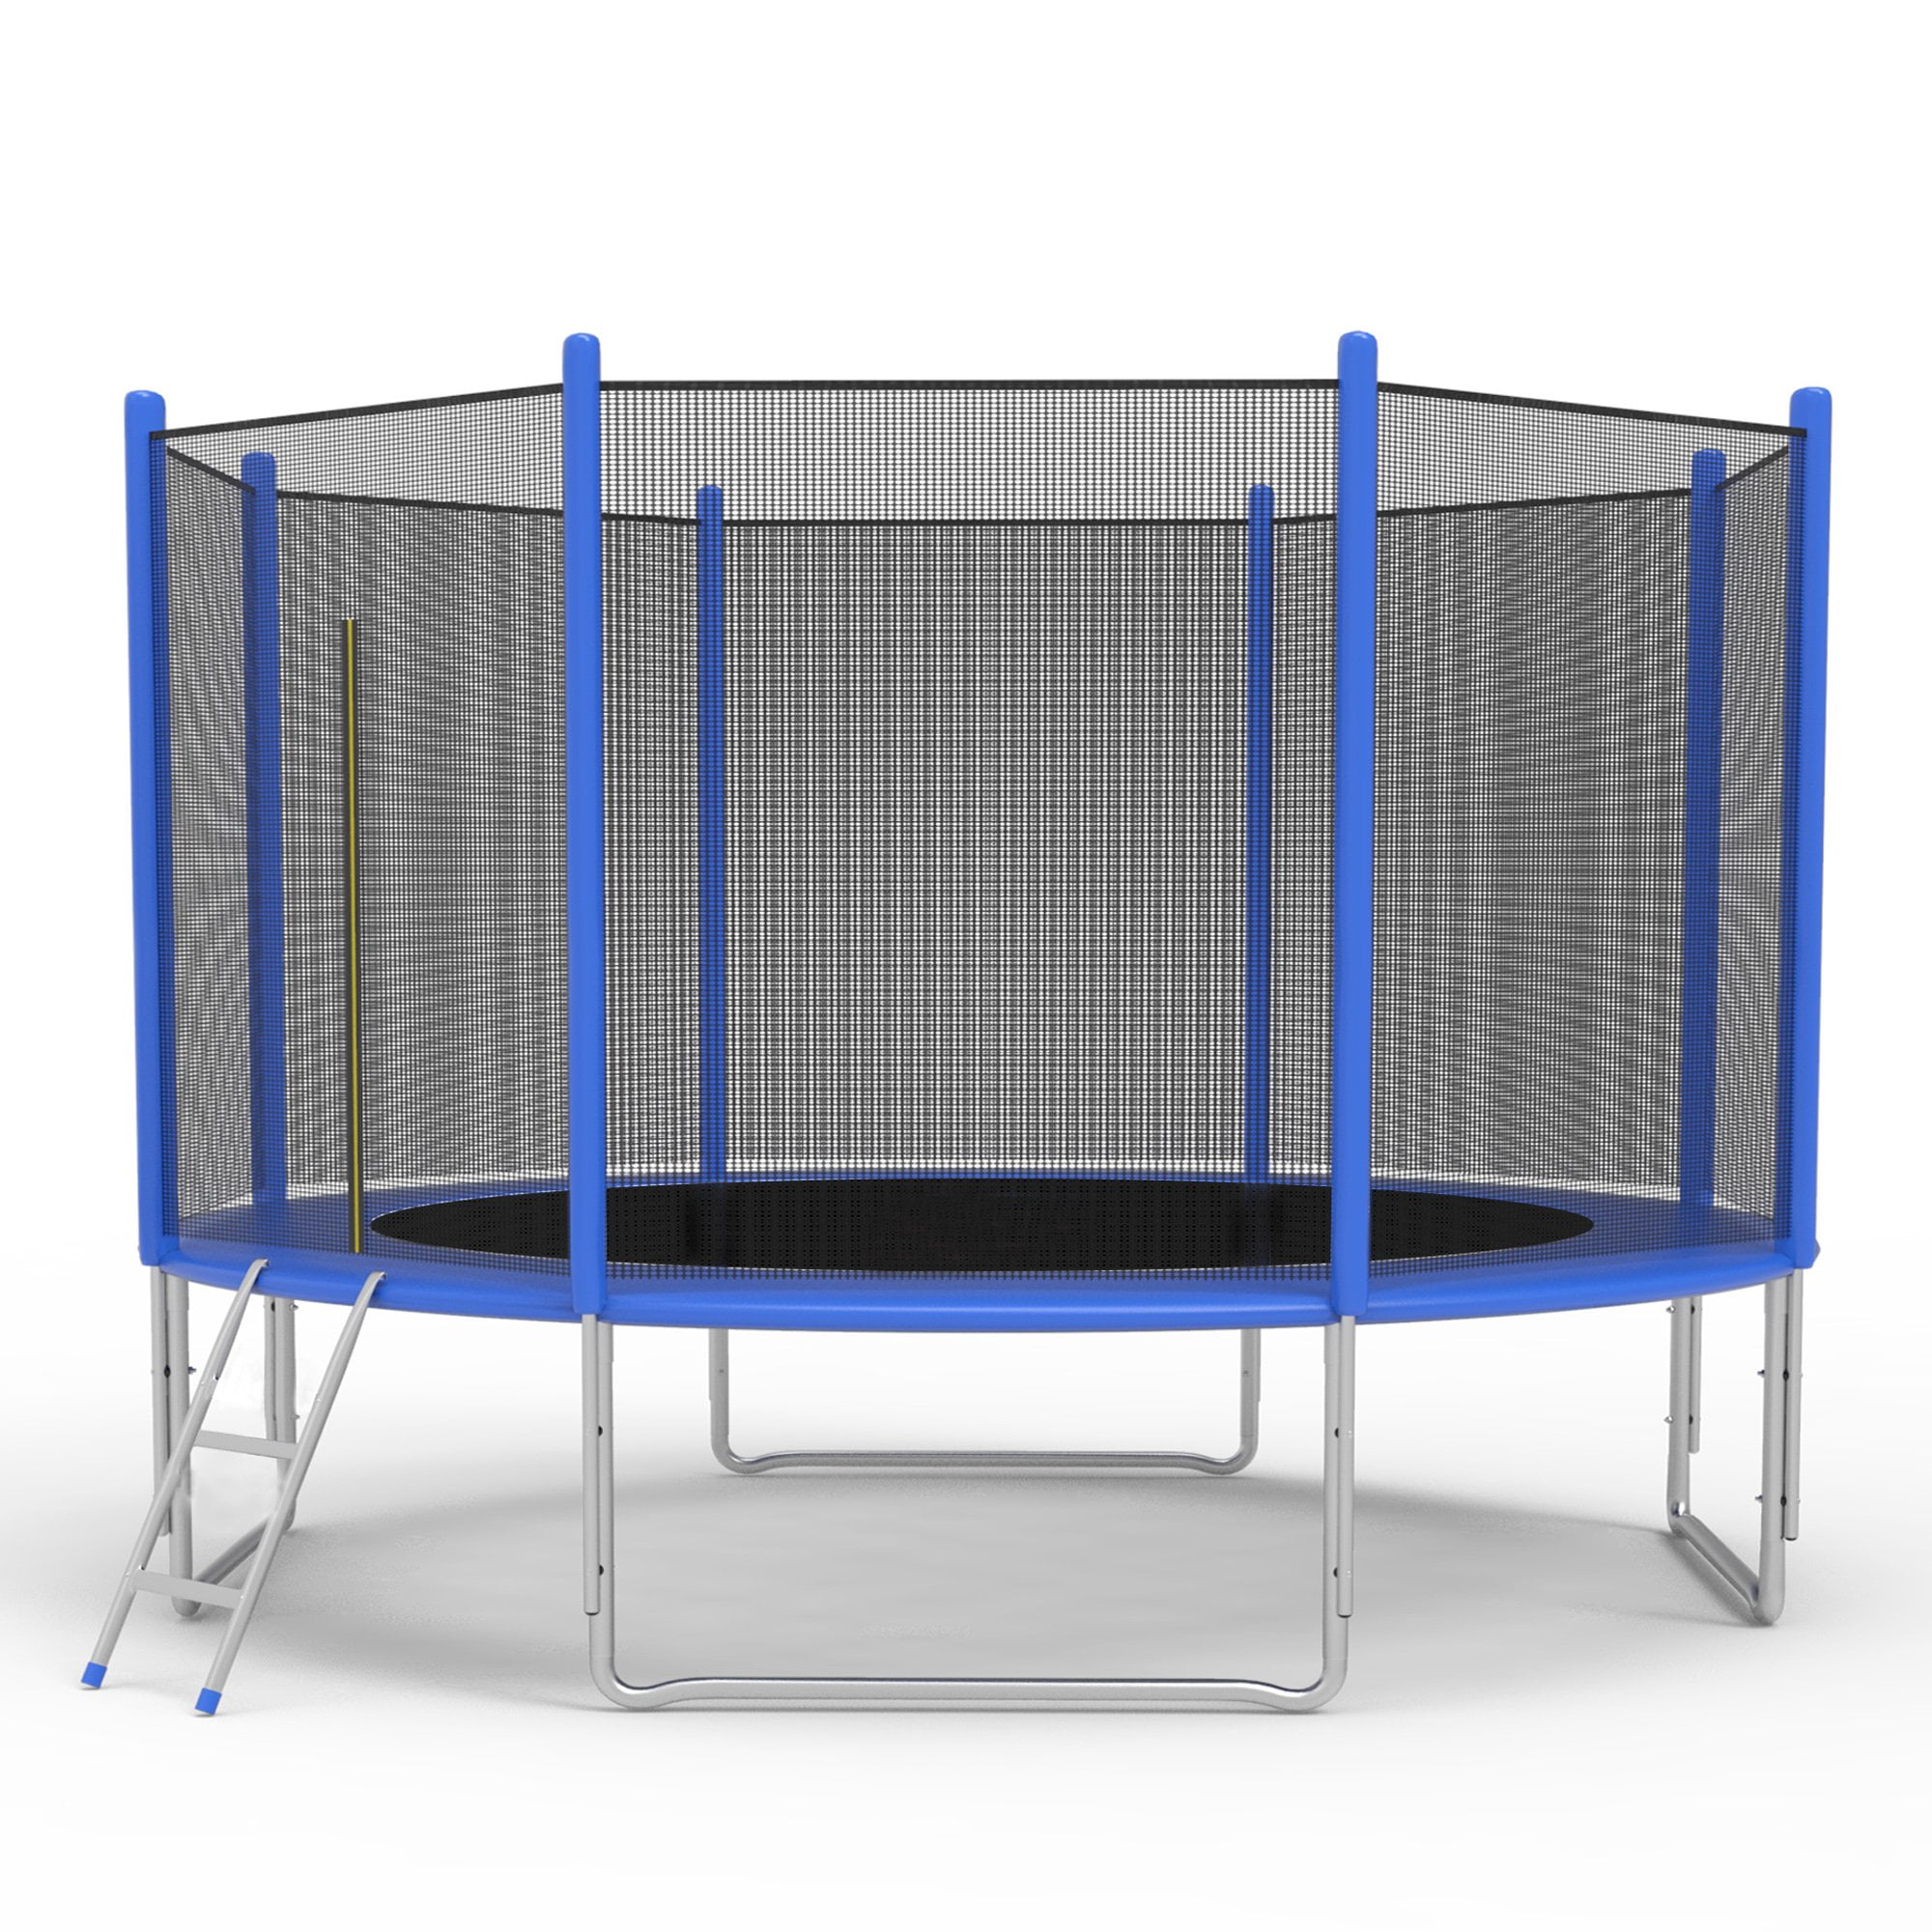 KARMAS PRODUCT 12FT Trampoline for Kids - Outdoor Recreational ...